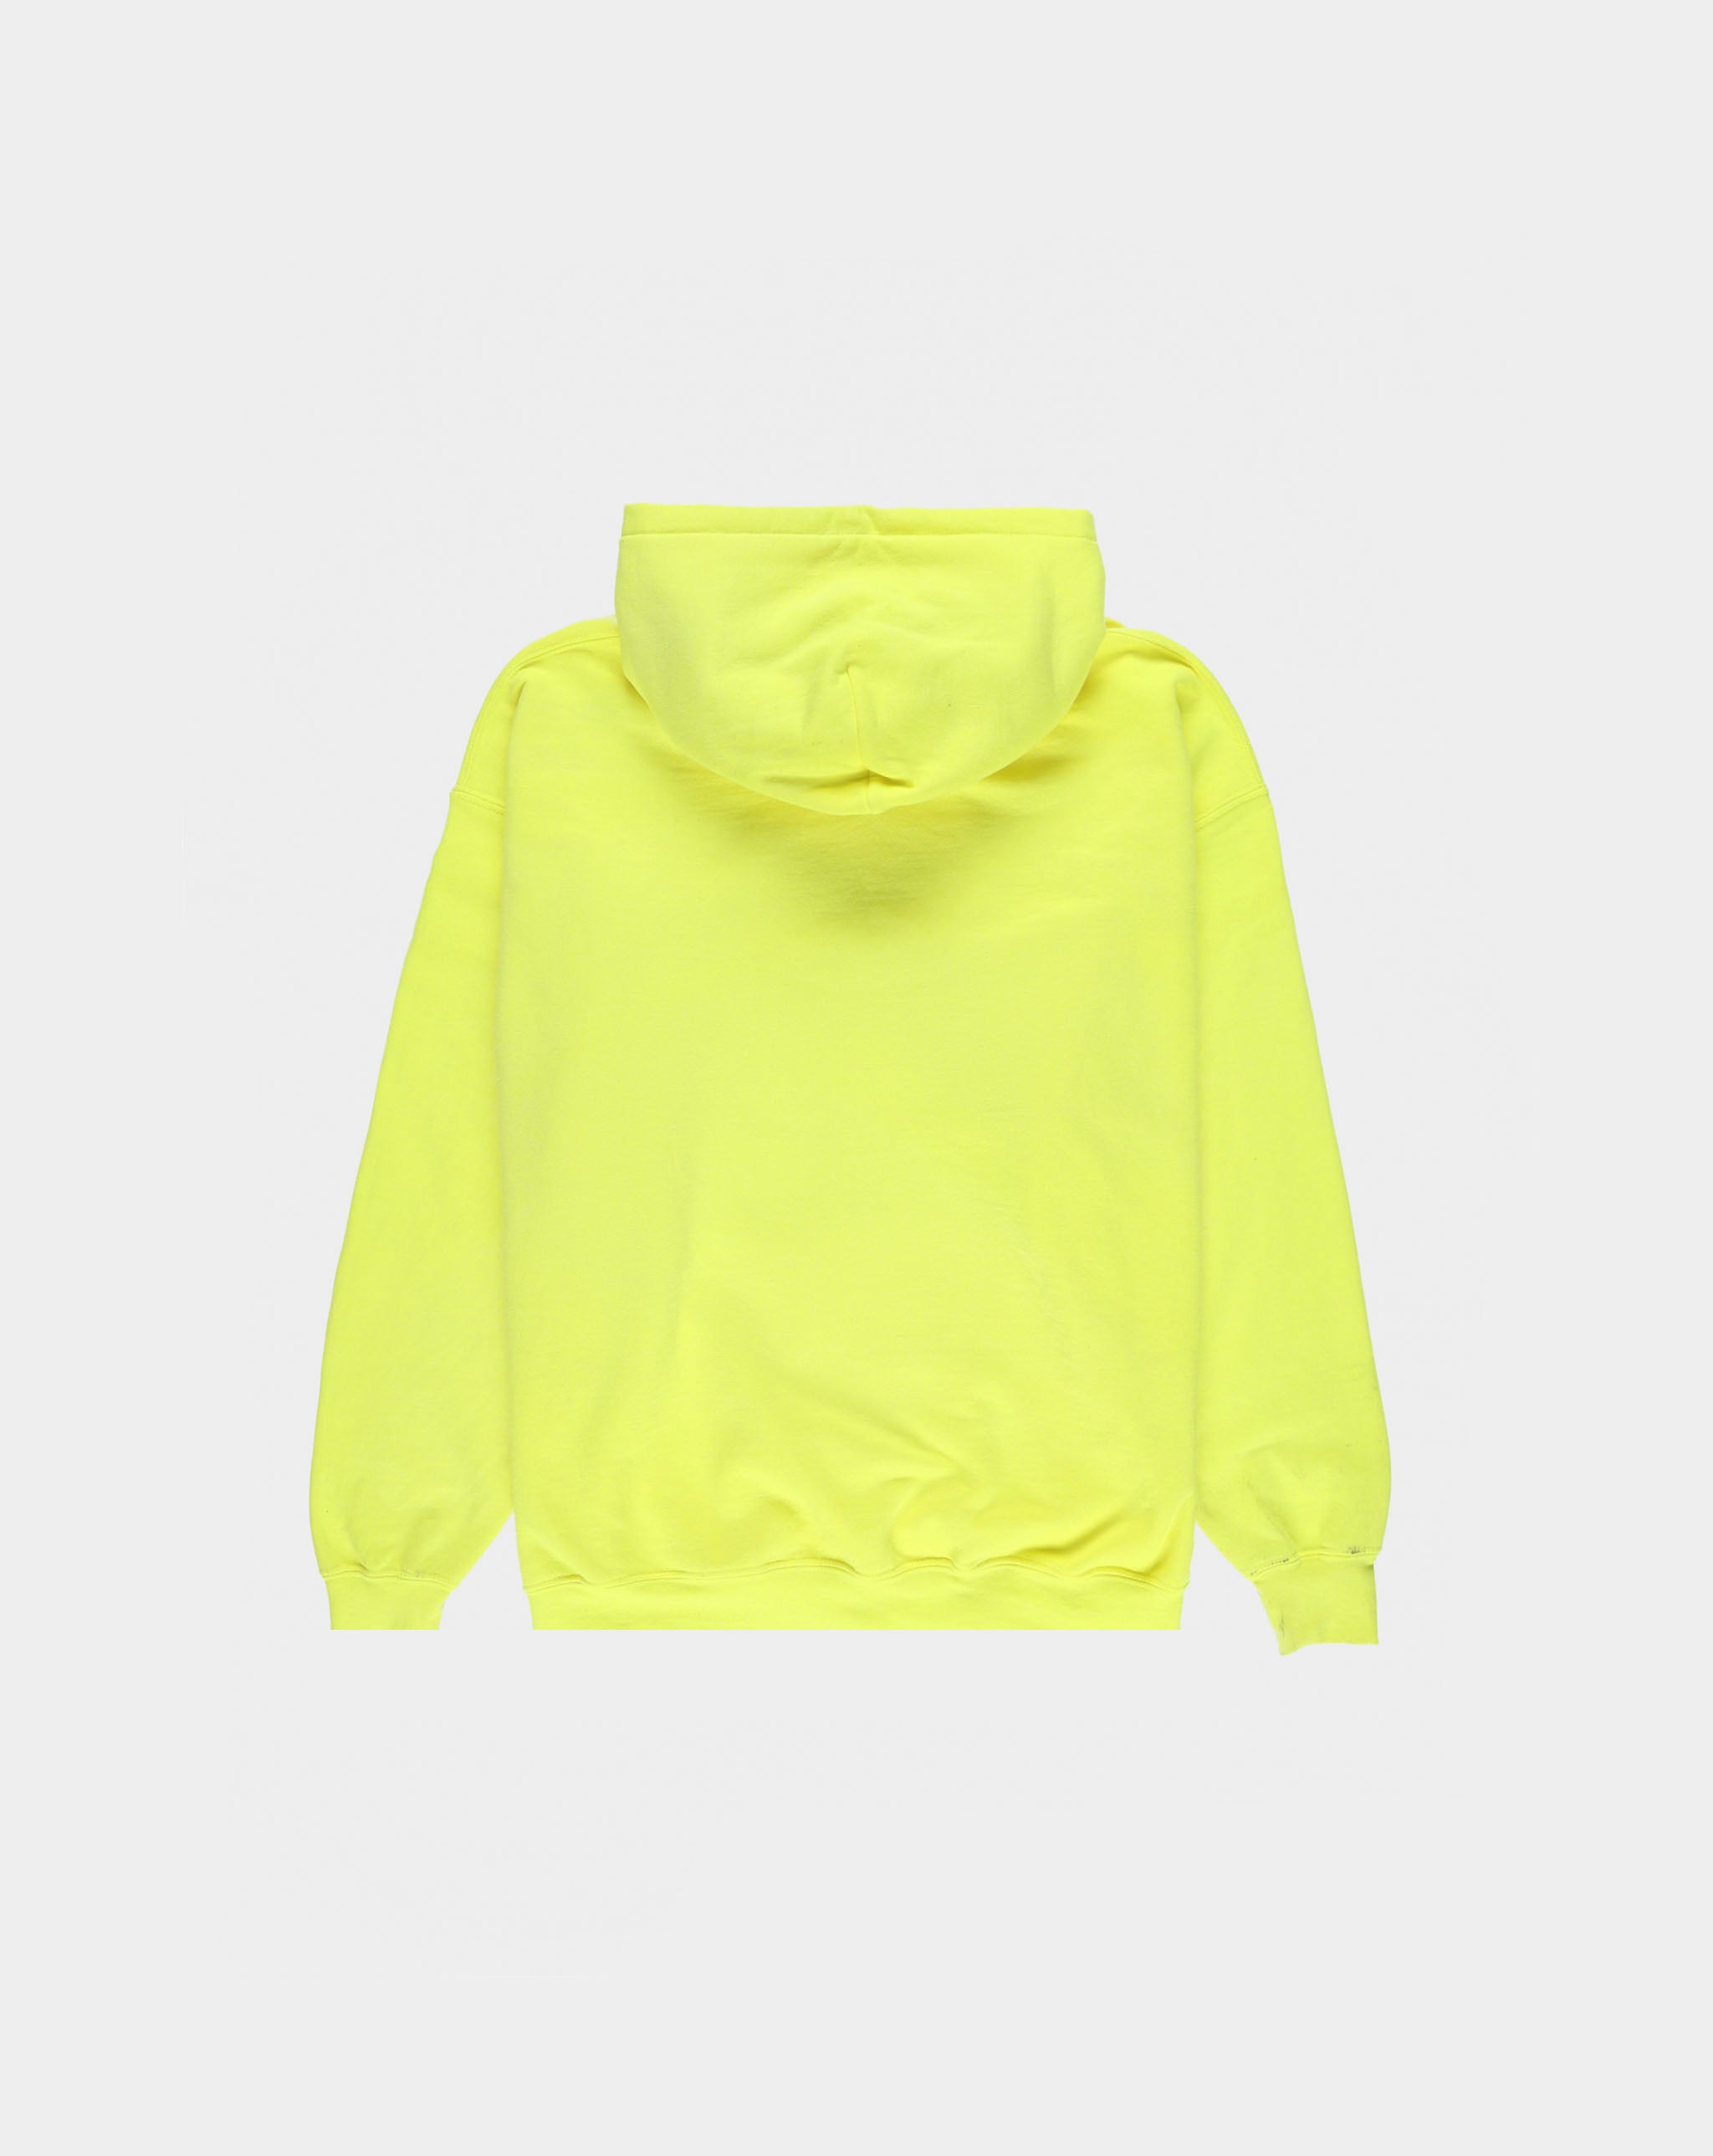 Contrast High CHxX Transient Hoodie  - XHIBITION